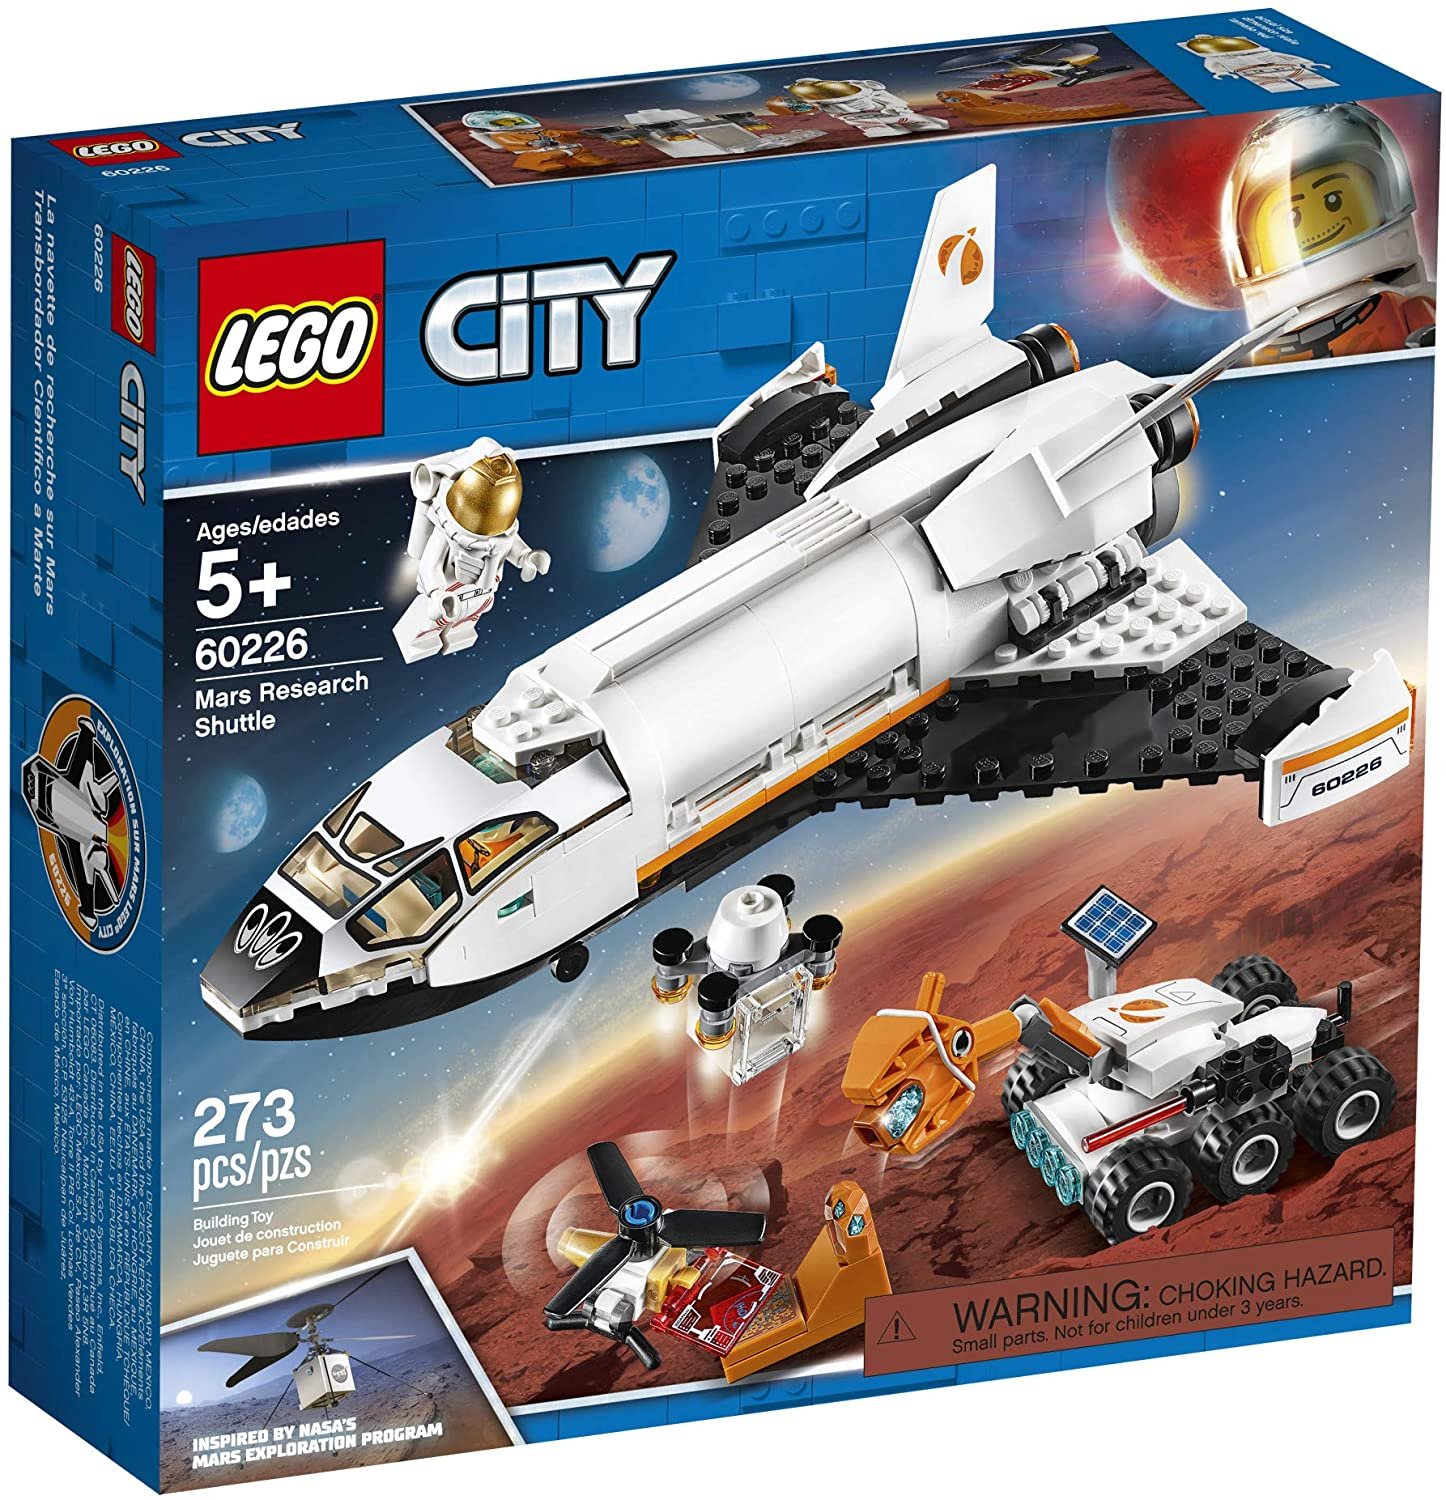 LEGO City Space Mars Research Shuttle 60226 Space Shuttle Toy Building Kit